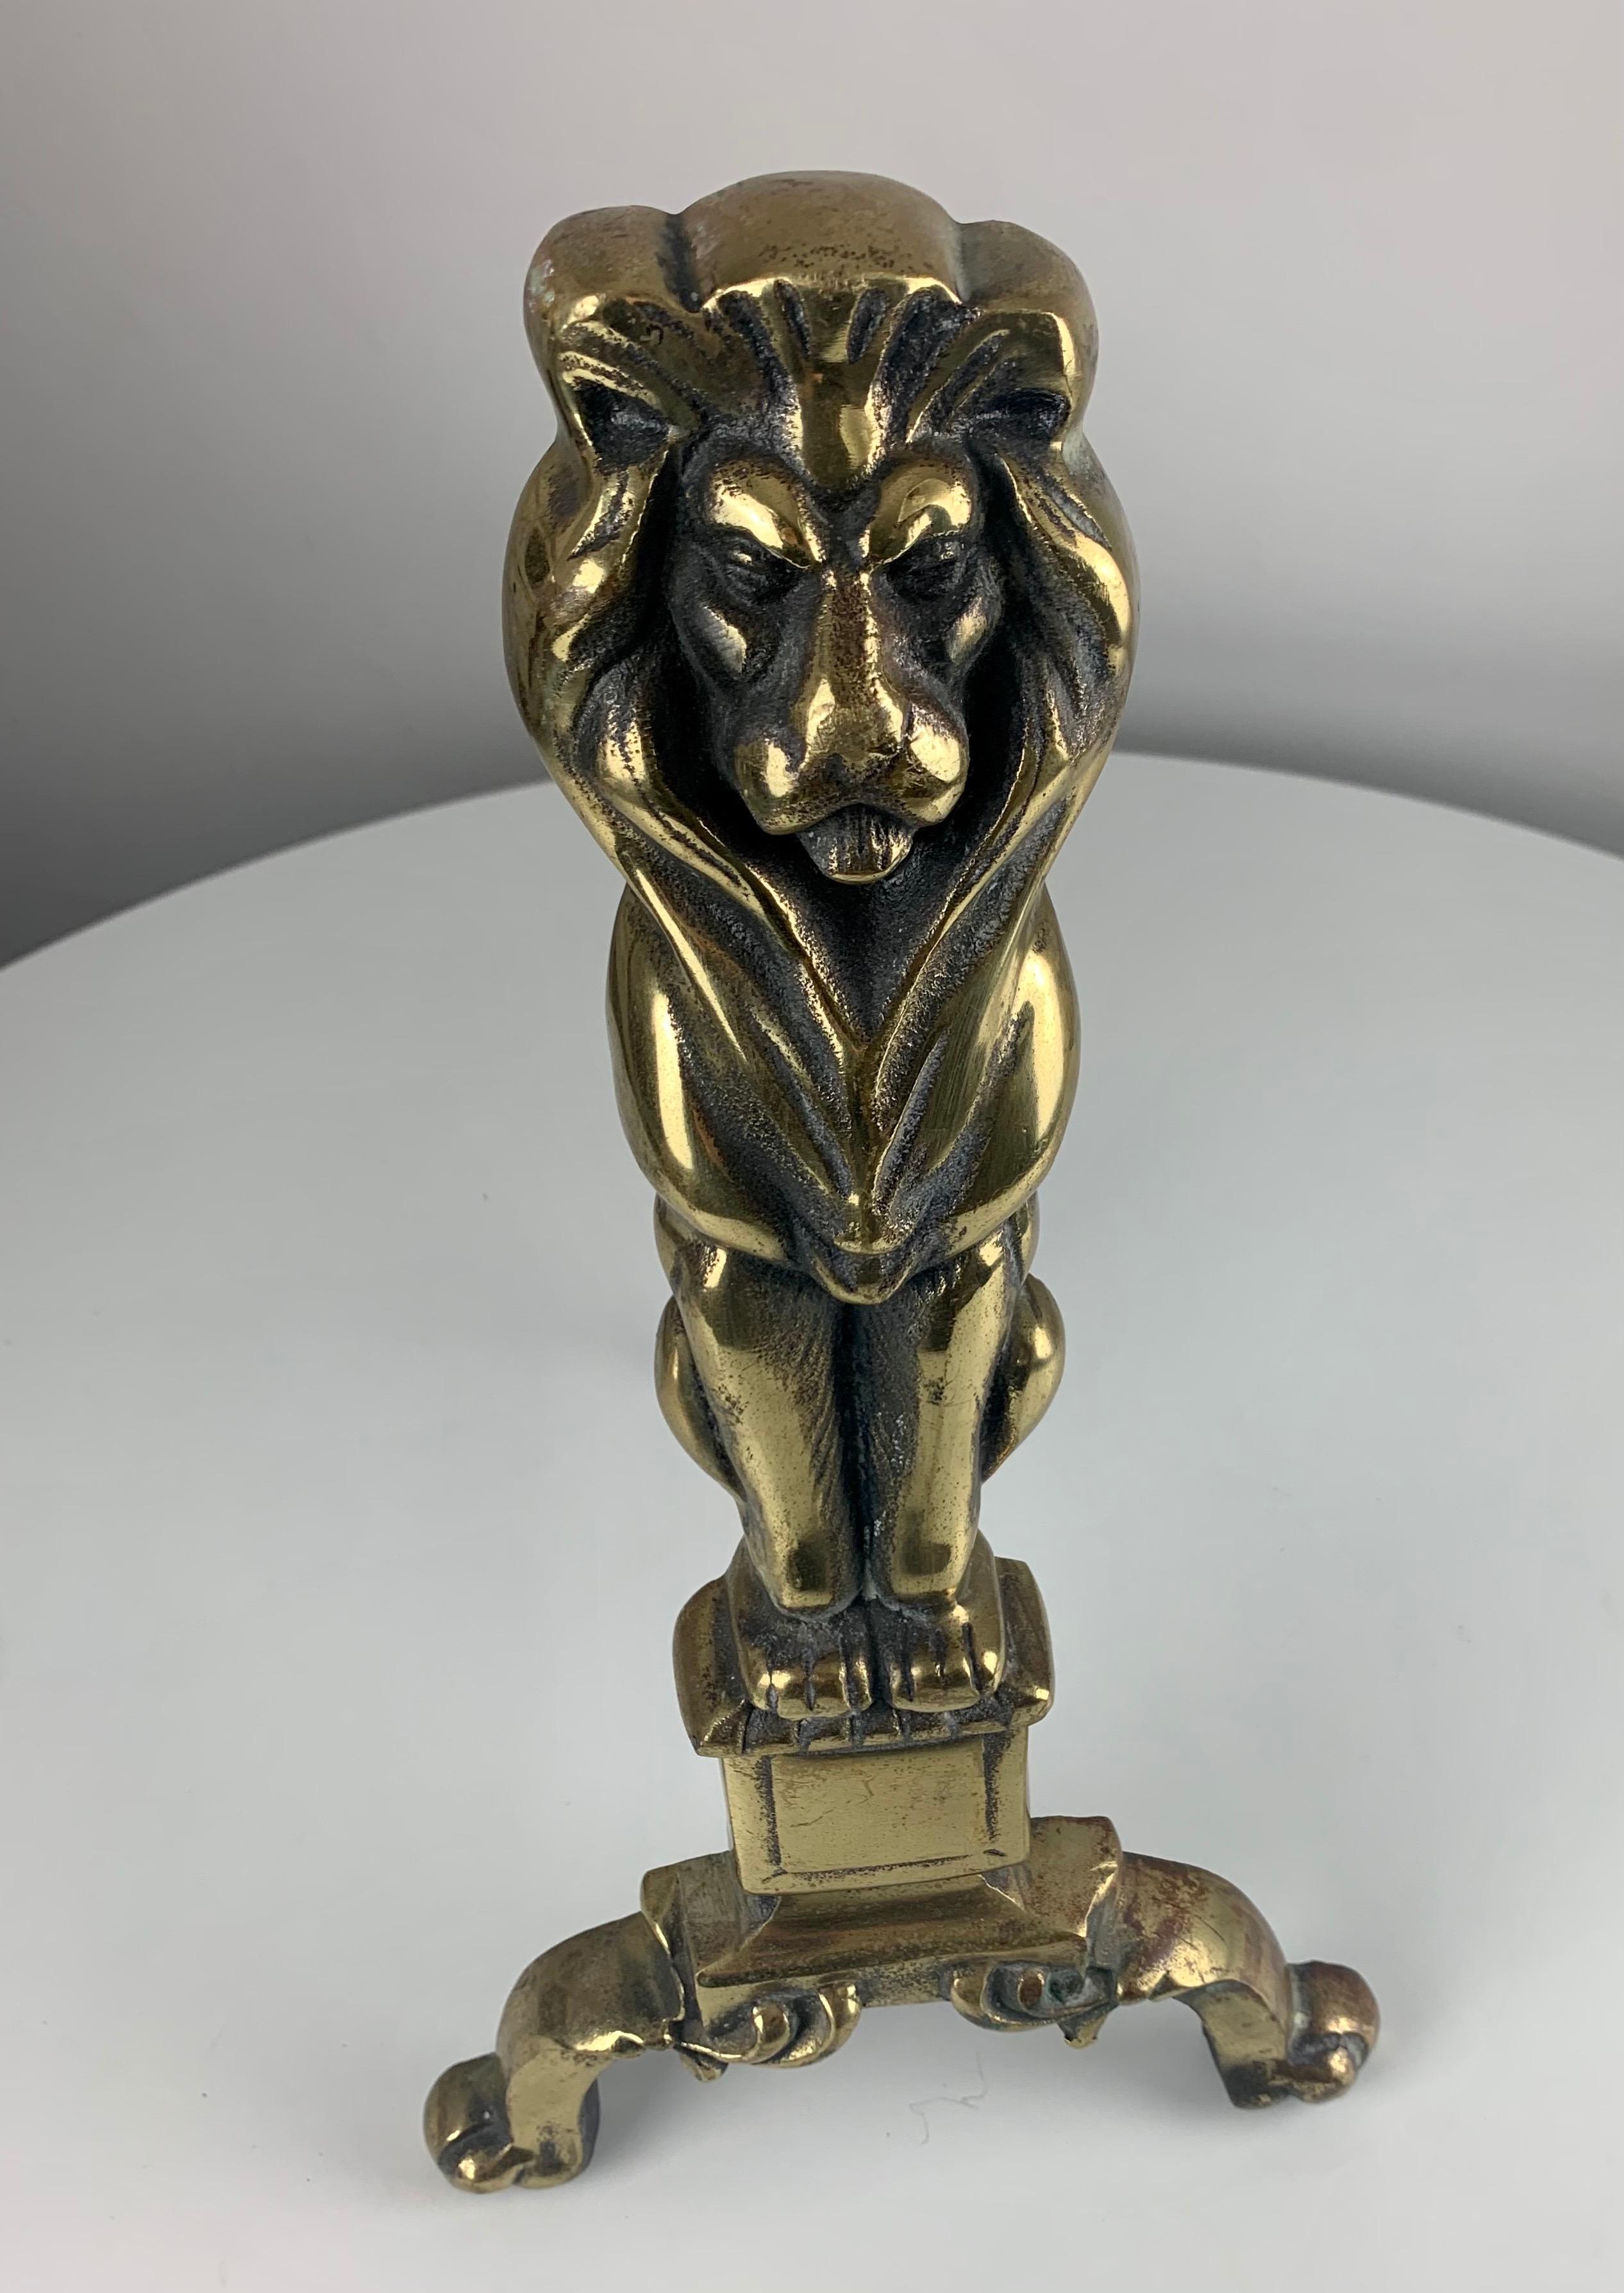 A pair of 19th century Victorian polished brass lion head fire dogs andirons
fine detail and good casting.

Dimensions:
Height of dogs 17 inch
Height of arms 4 inch
Depth external 10 inch
Depth internal 9 inch
Base width 9.5 inch
Top width